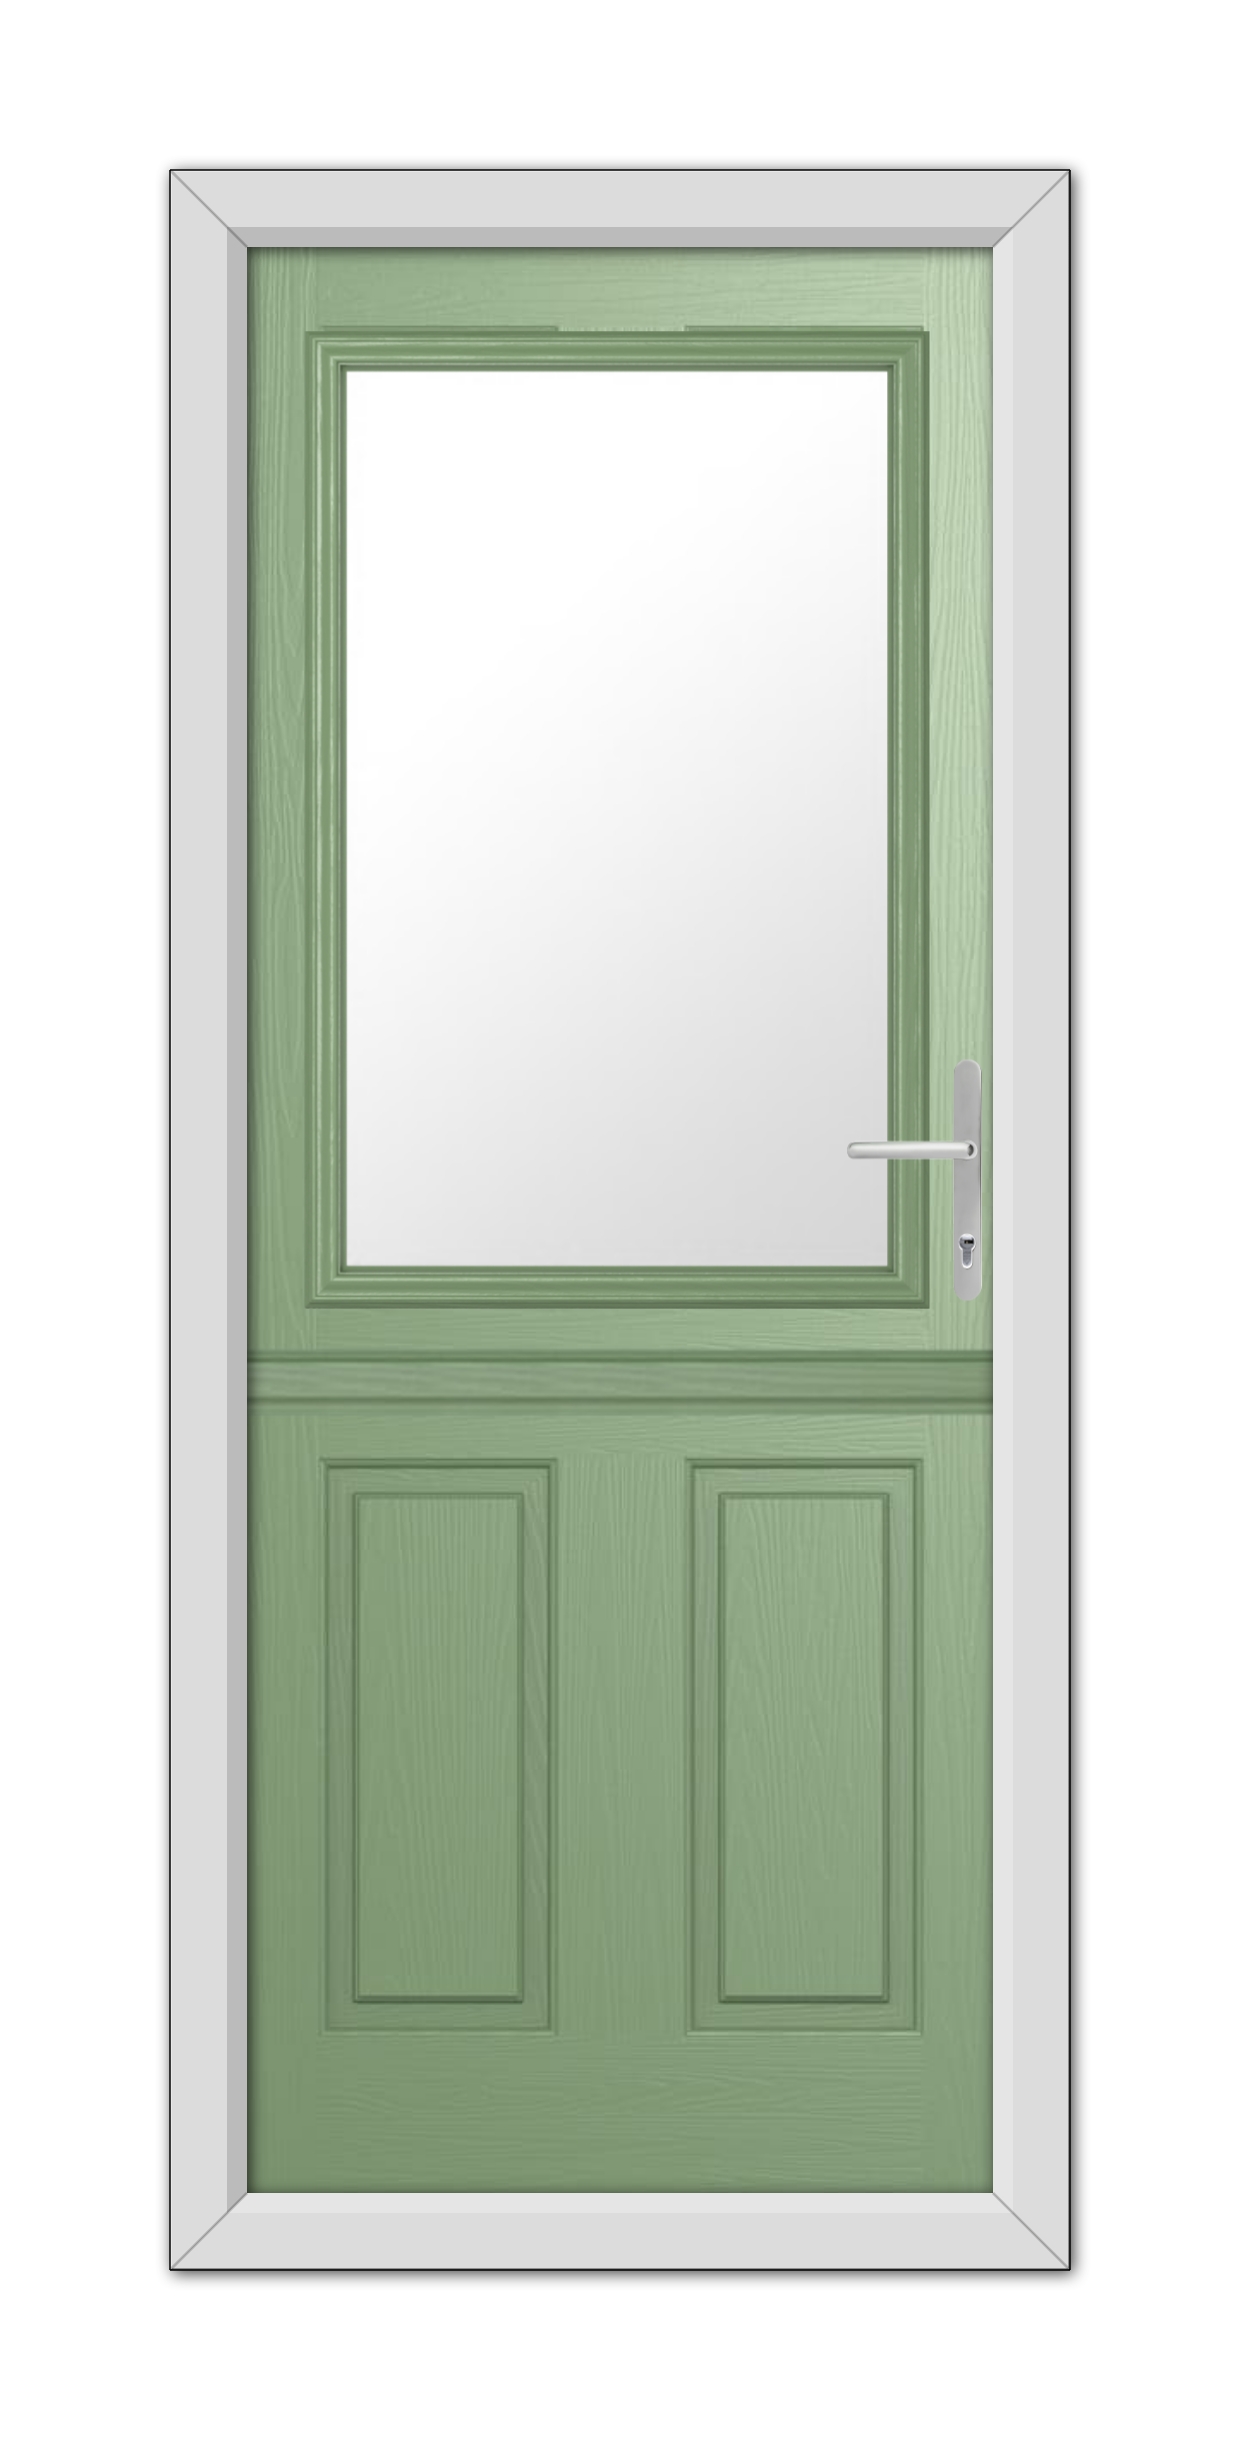 A Chartwell Green Buxton Stable Composite Door 48mm Timber Core with a large windowpane, framed in a white doorway, featuring a modern handle on the right side.